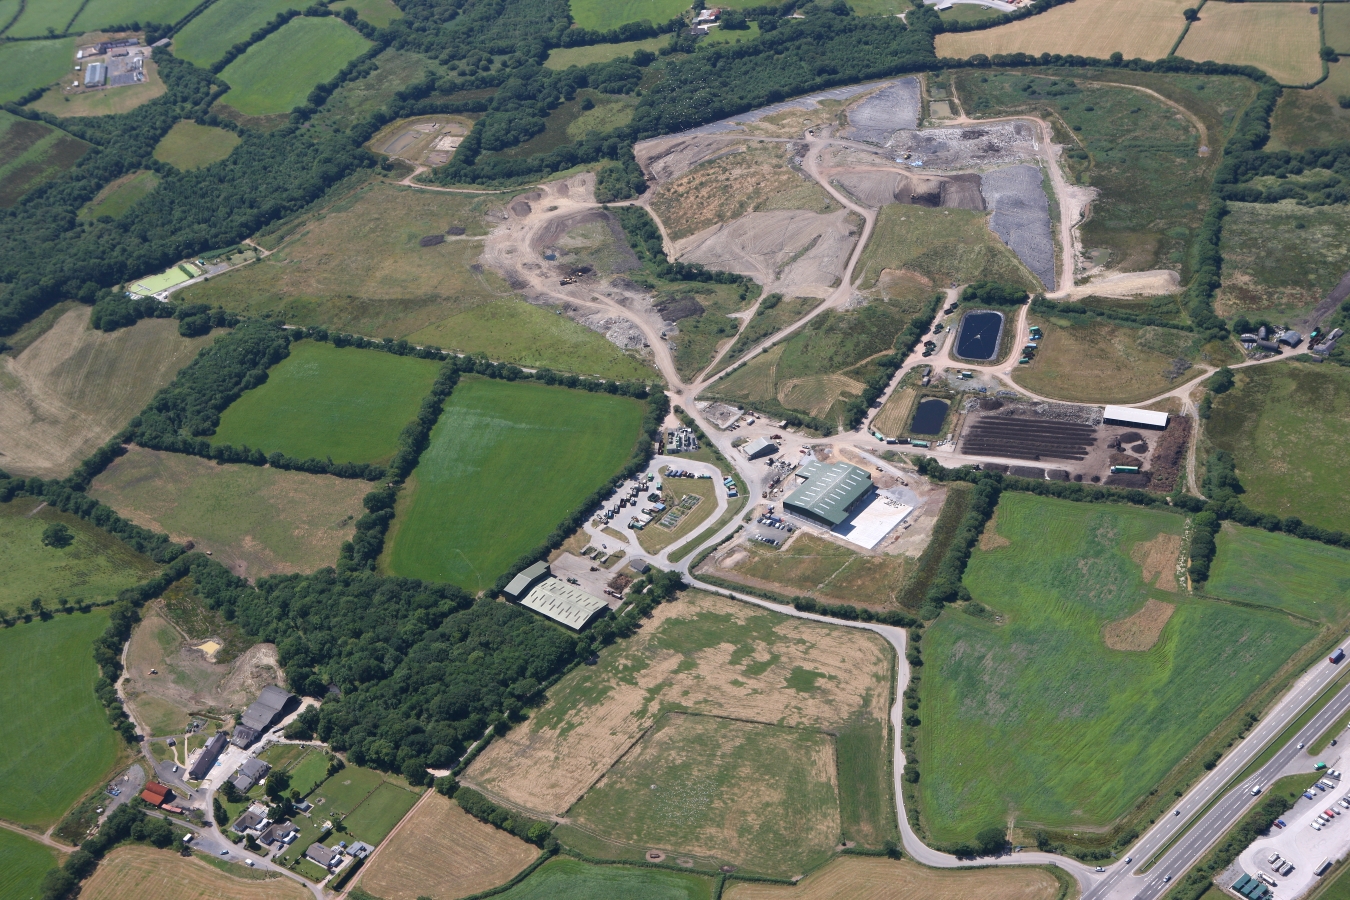 Materials Recycling Facility taken from the air